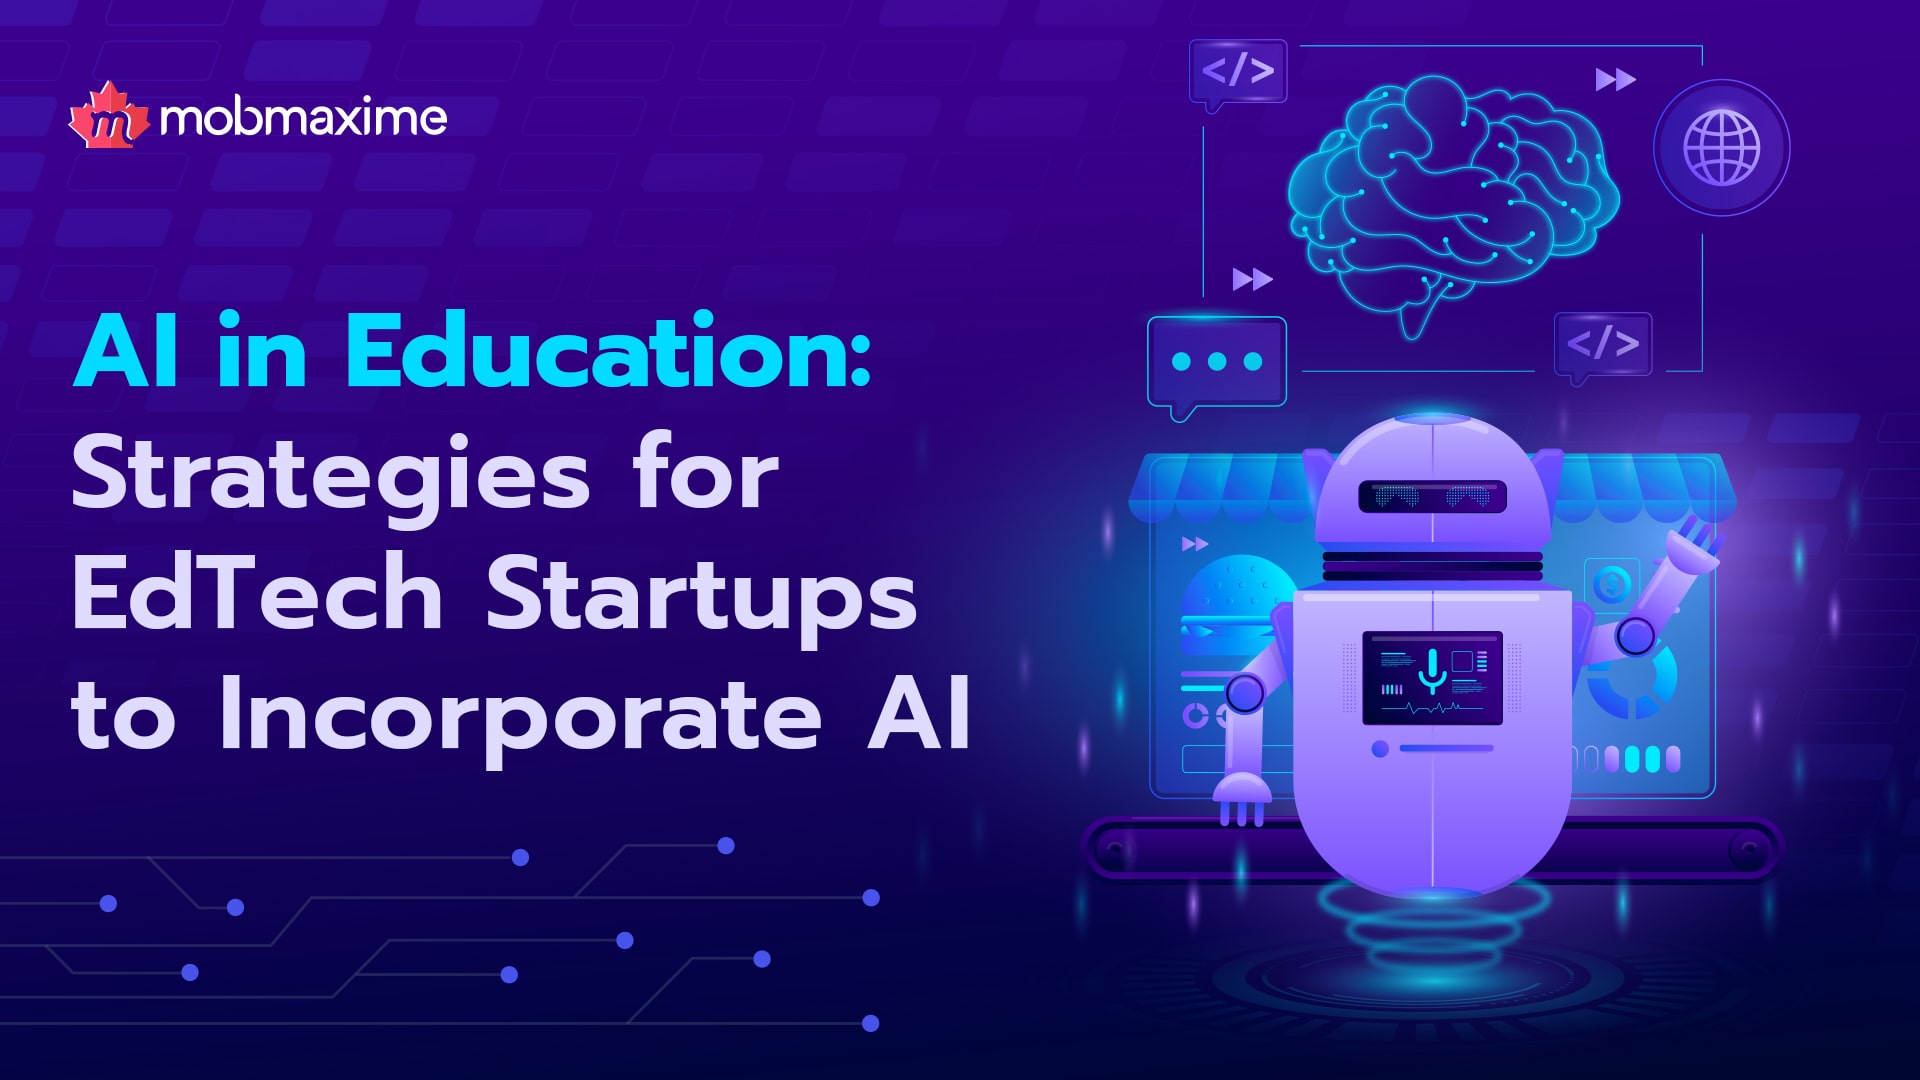 AI in Education: Strategies for EdTech Startups to Incorporate AI